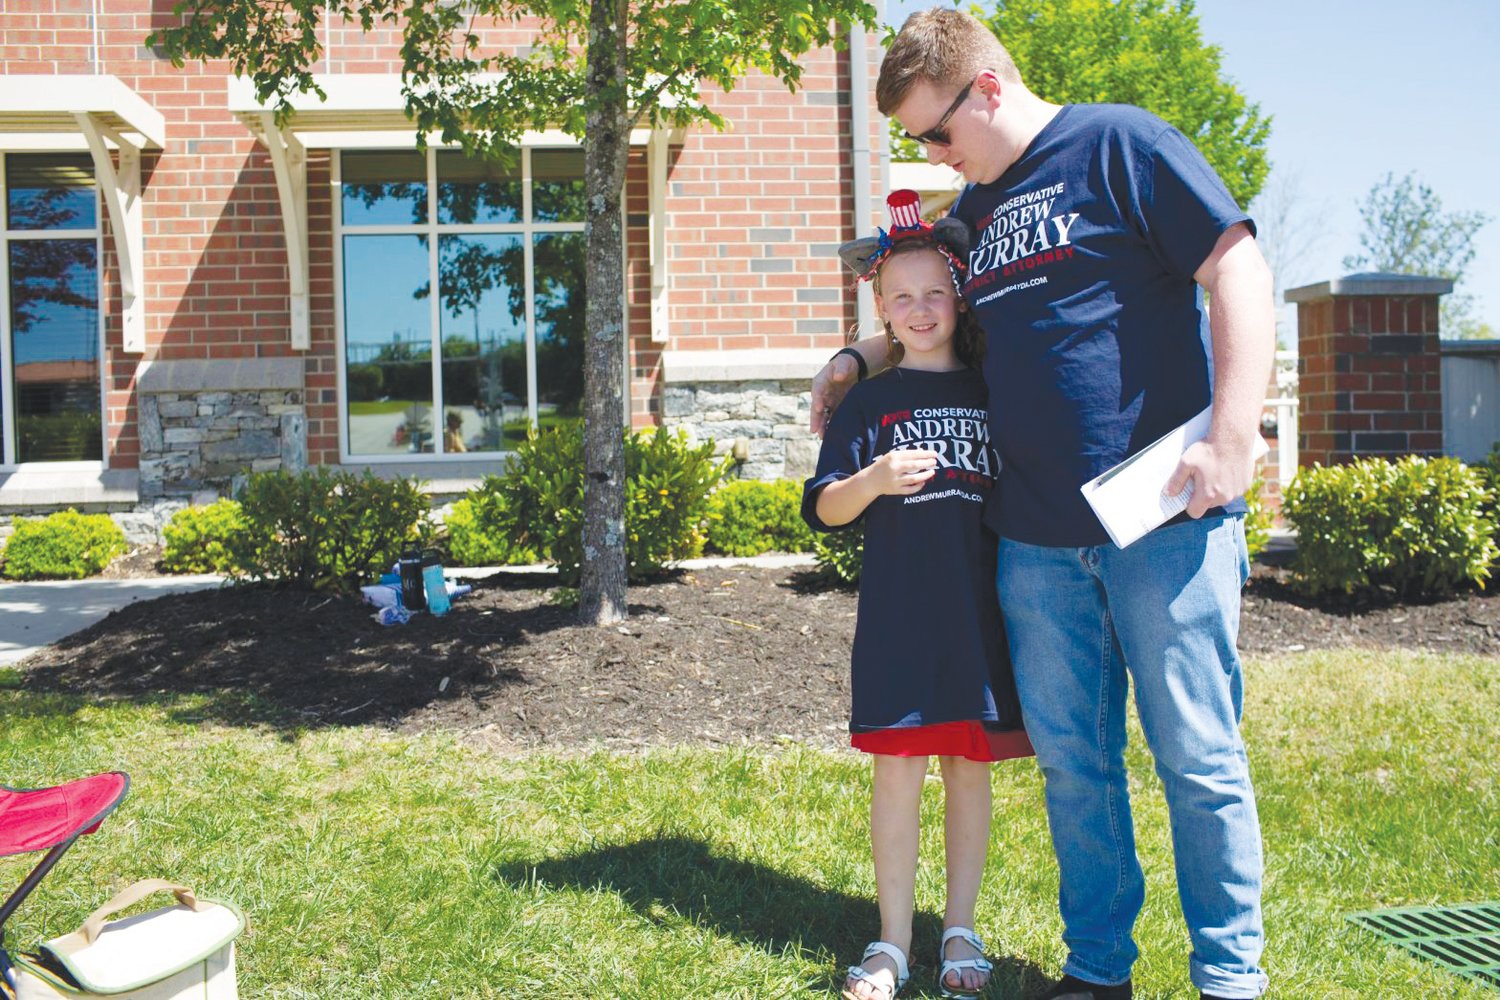 Derek Murray campaigns for his father, District Attorney Andrew Murray with his daughter Charlotte on May 17 in Henderson County at the Fletcher Town Hall polling place.